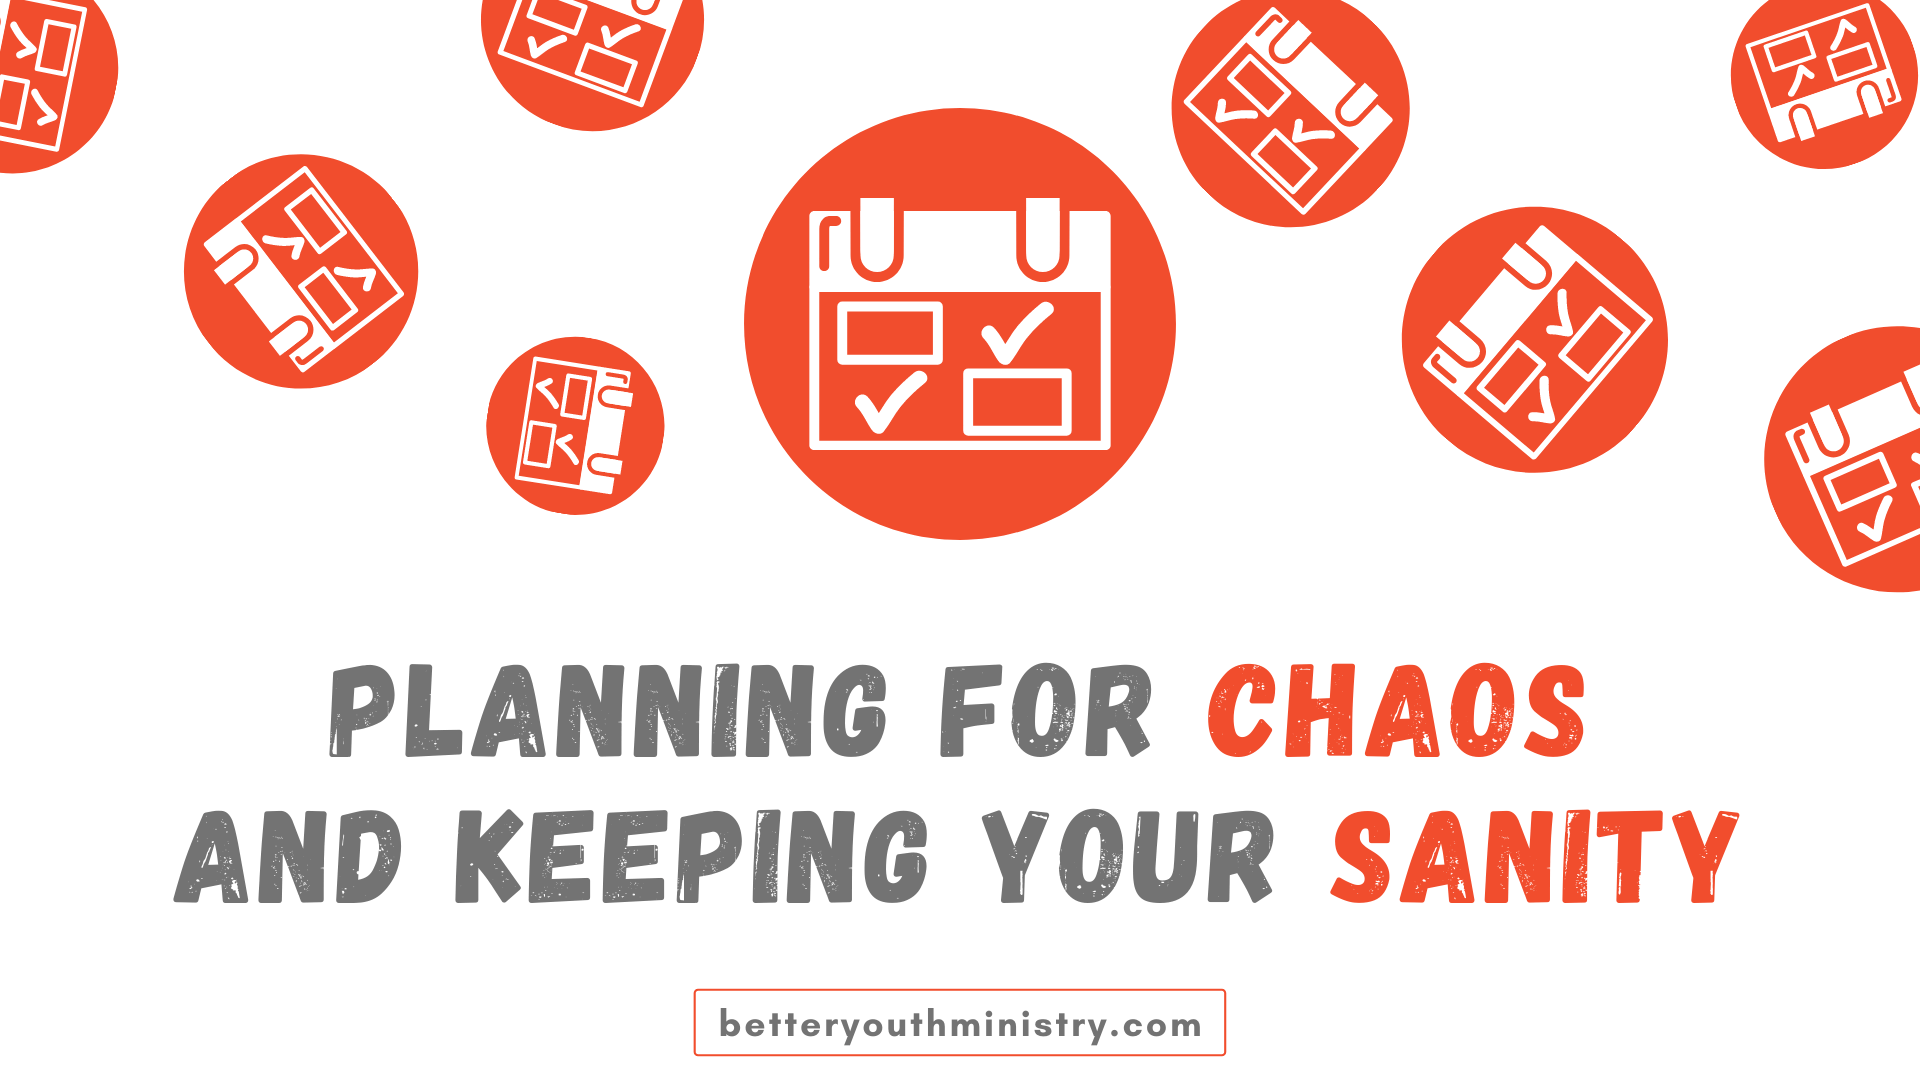 Planning for Chaos and Keeping Your Sanity